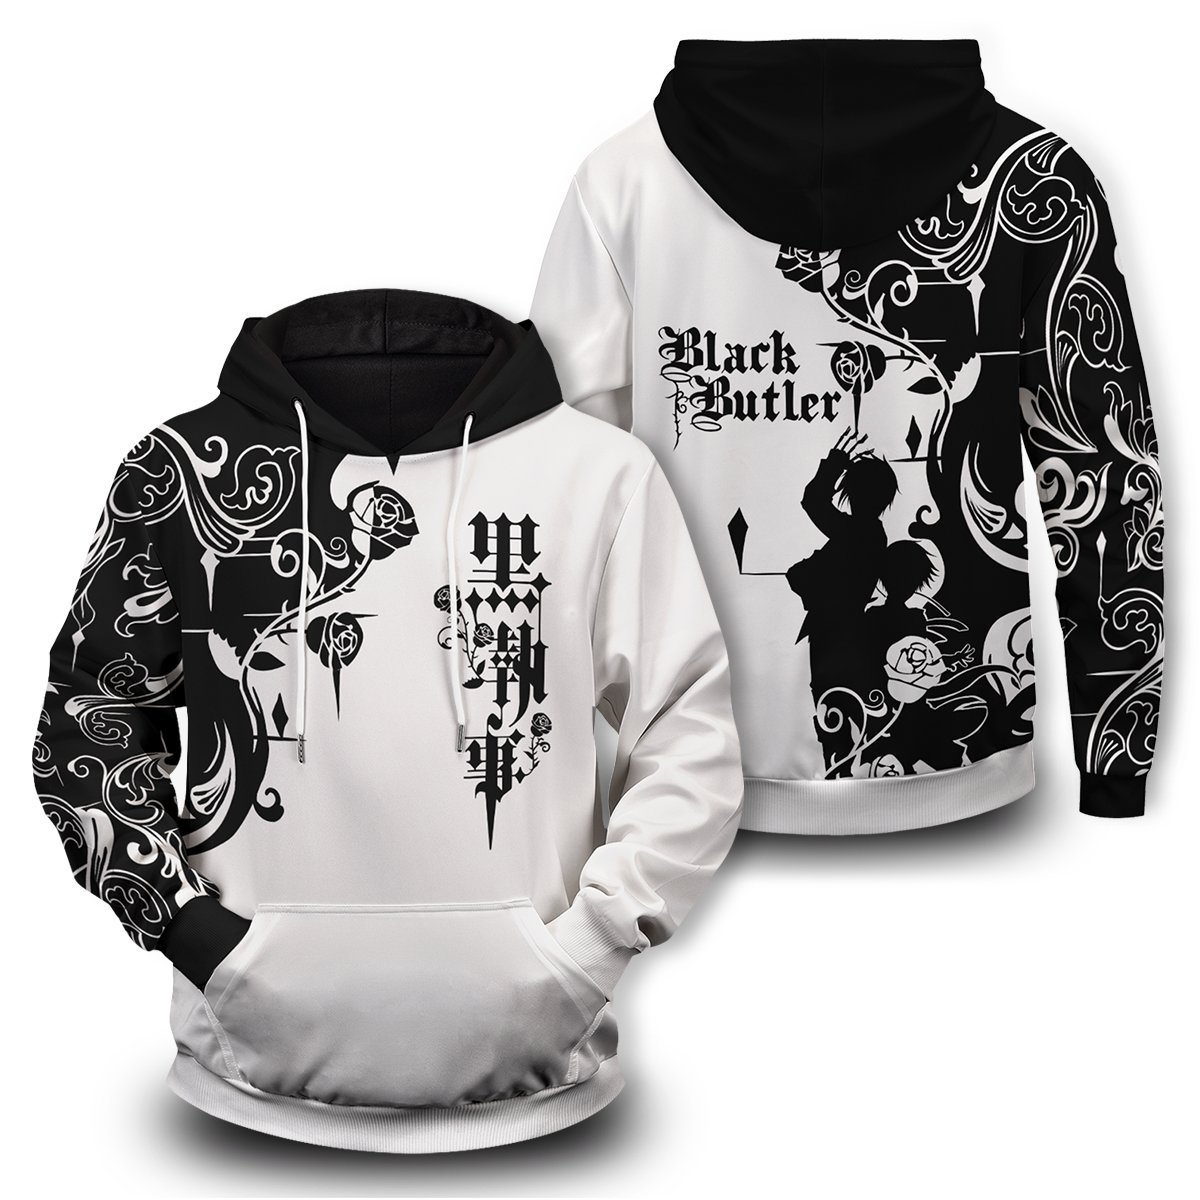 Black butler unisex pullover hoodie – Teasearch3d 210521